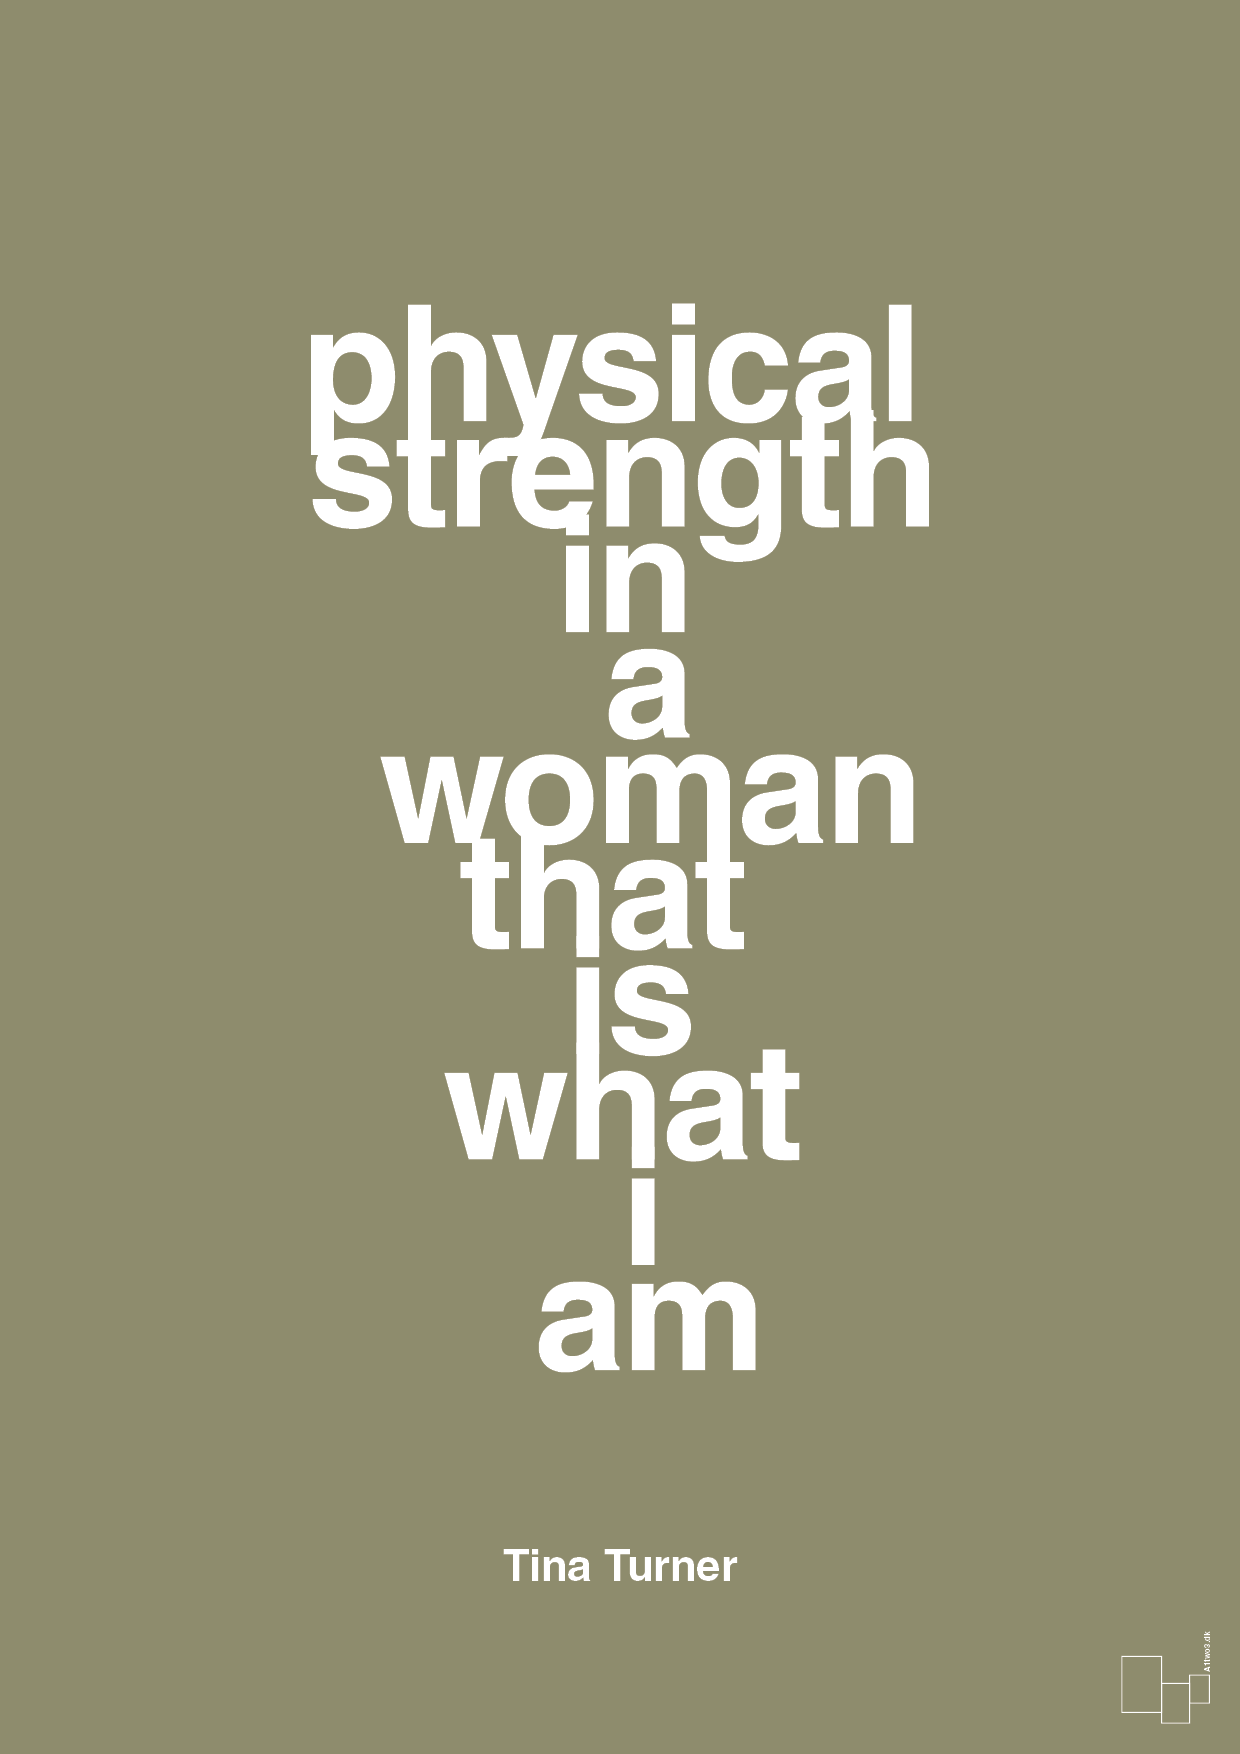 physical strength in a woman that’s what I am - Plakat med Citater i Misty Forrest